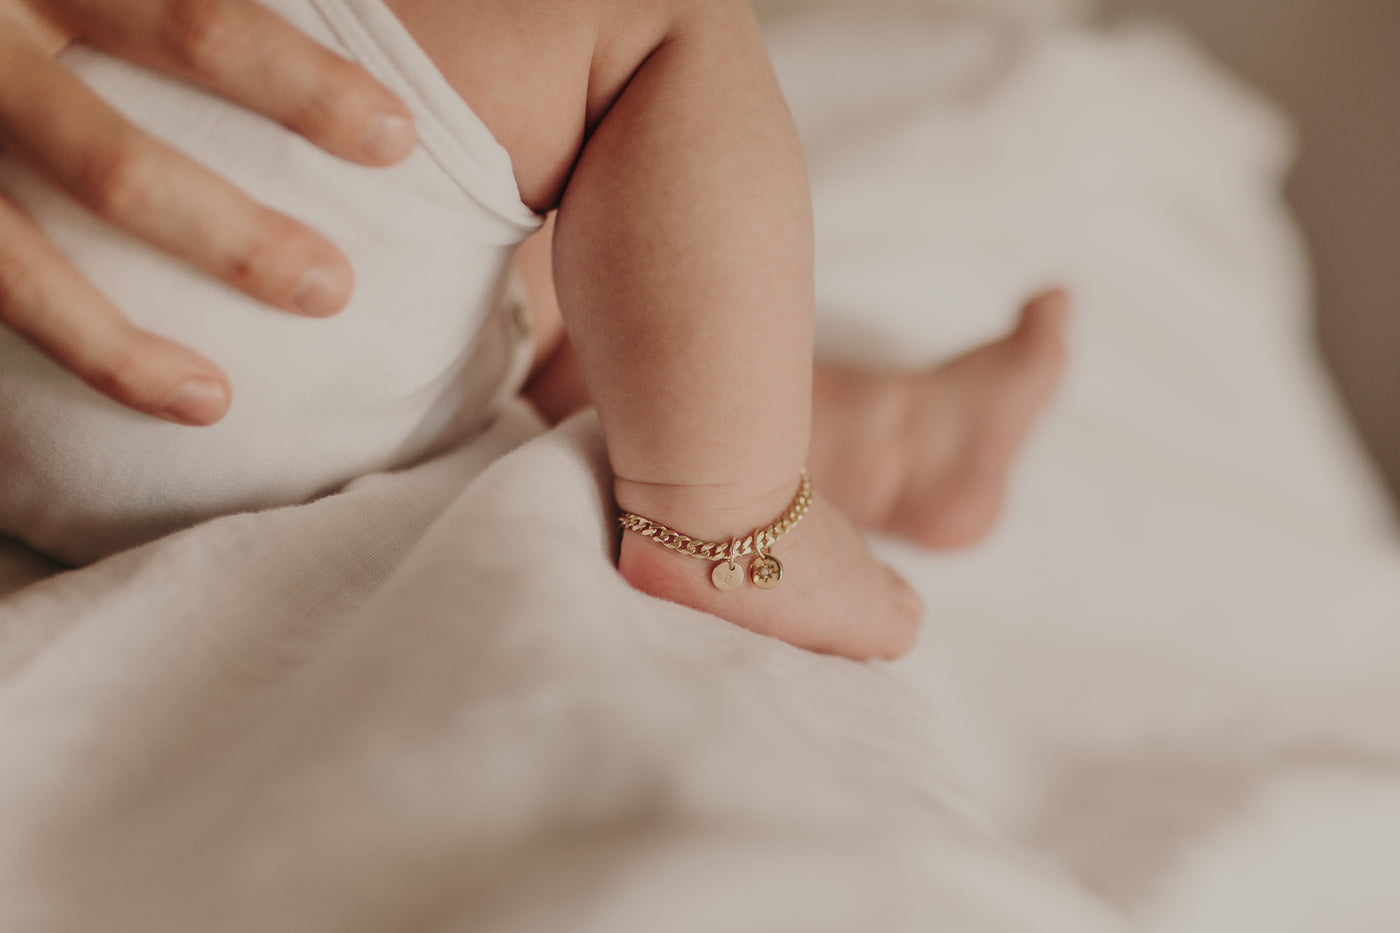 Baby Feet Name Bracelet with Beaded Chain